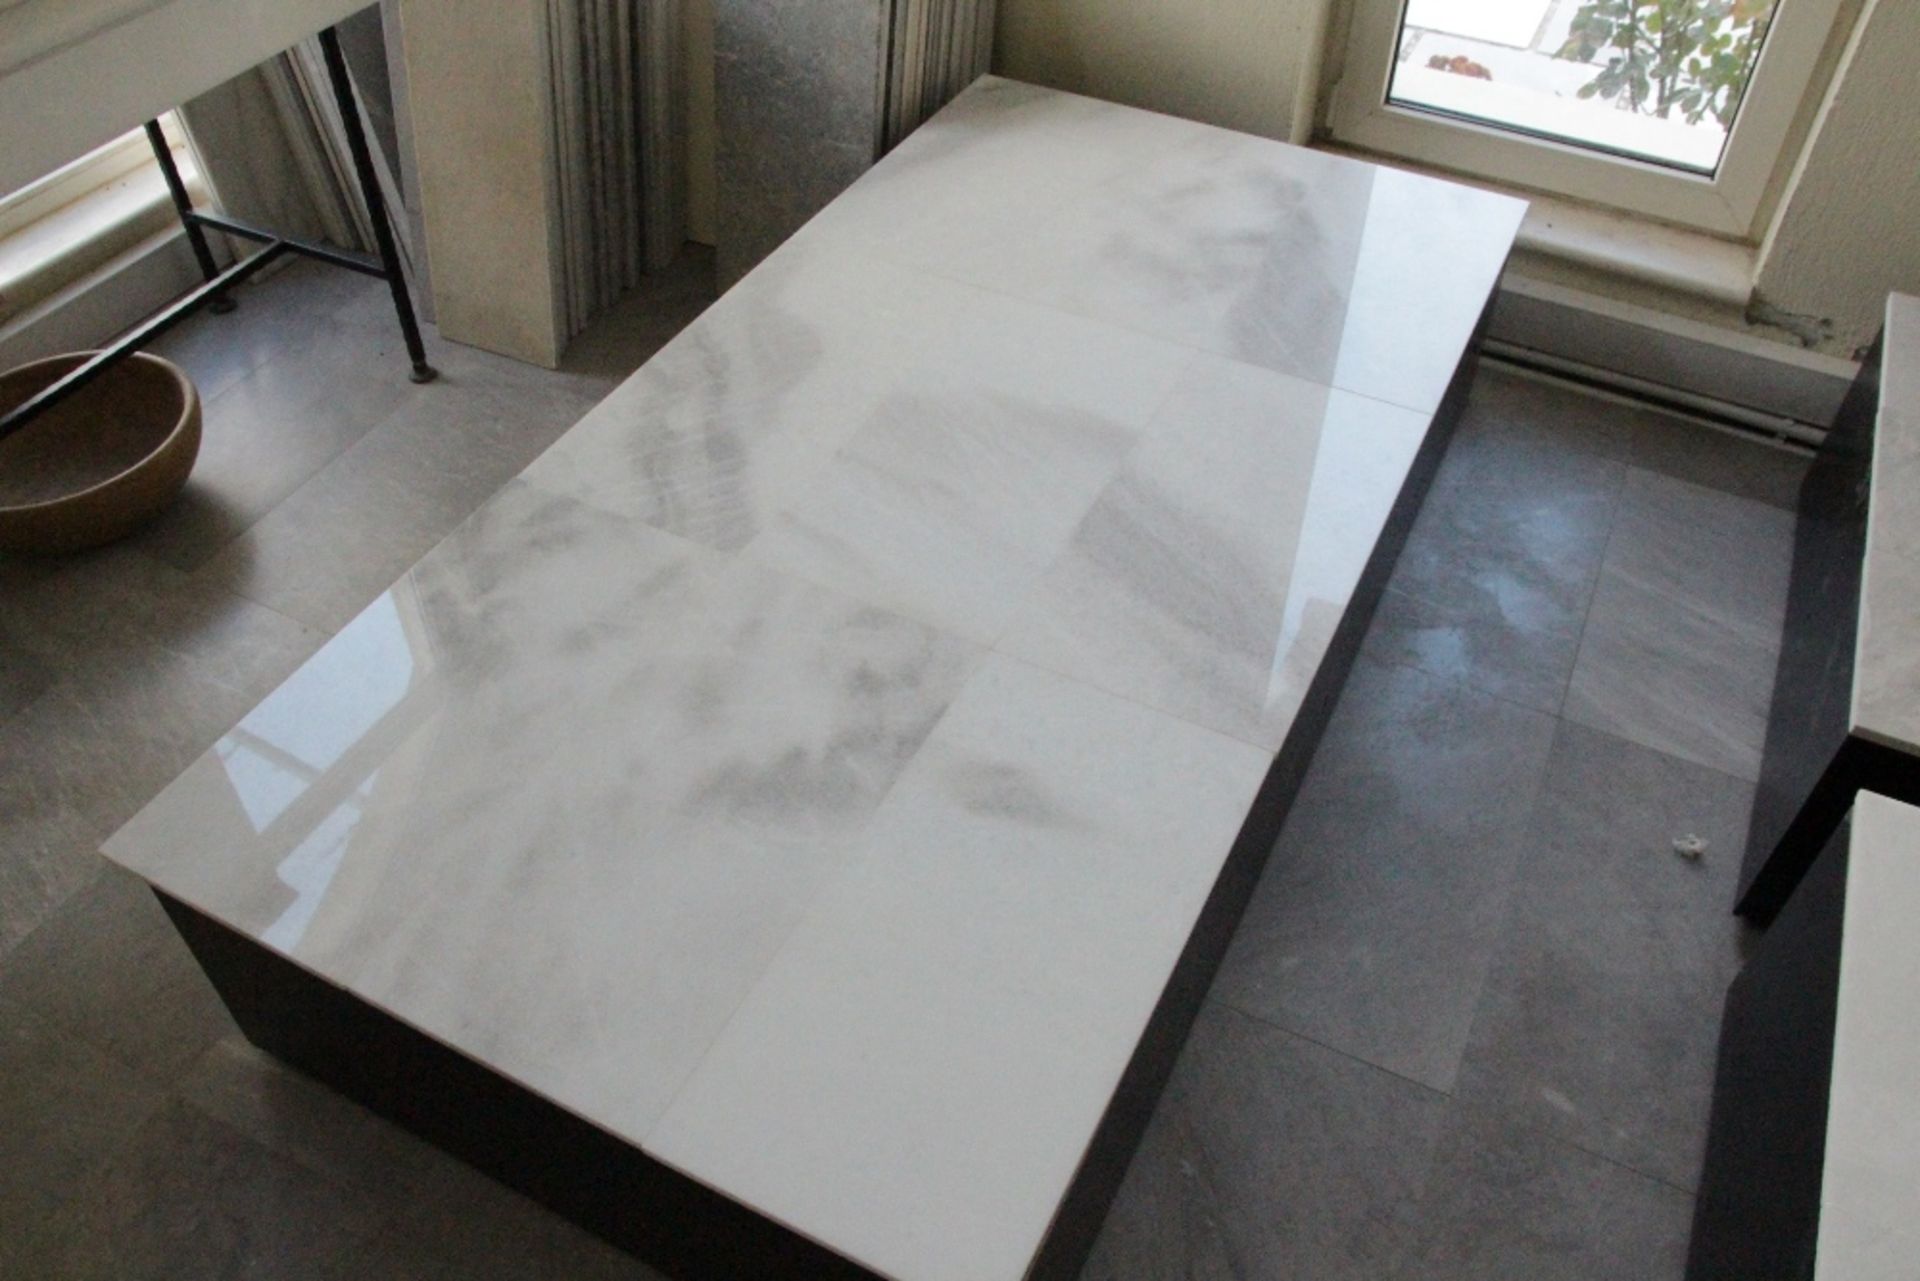 Lot containing 30 pieces (67.28 sq foot) of Polished Marble Tiles 45.7 x 45.7 x 1.25cm in Bianco